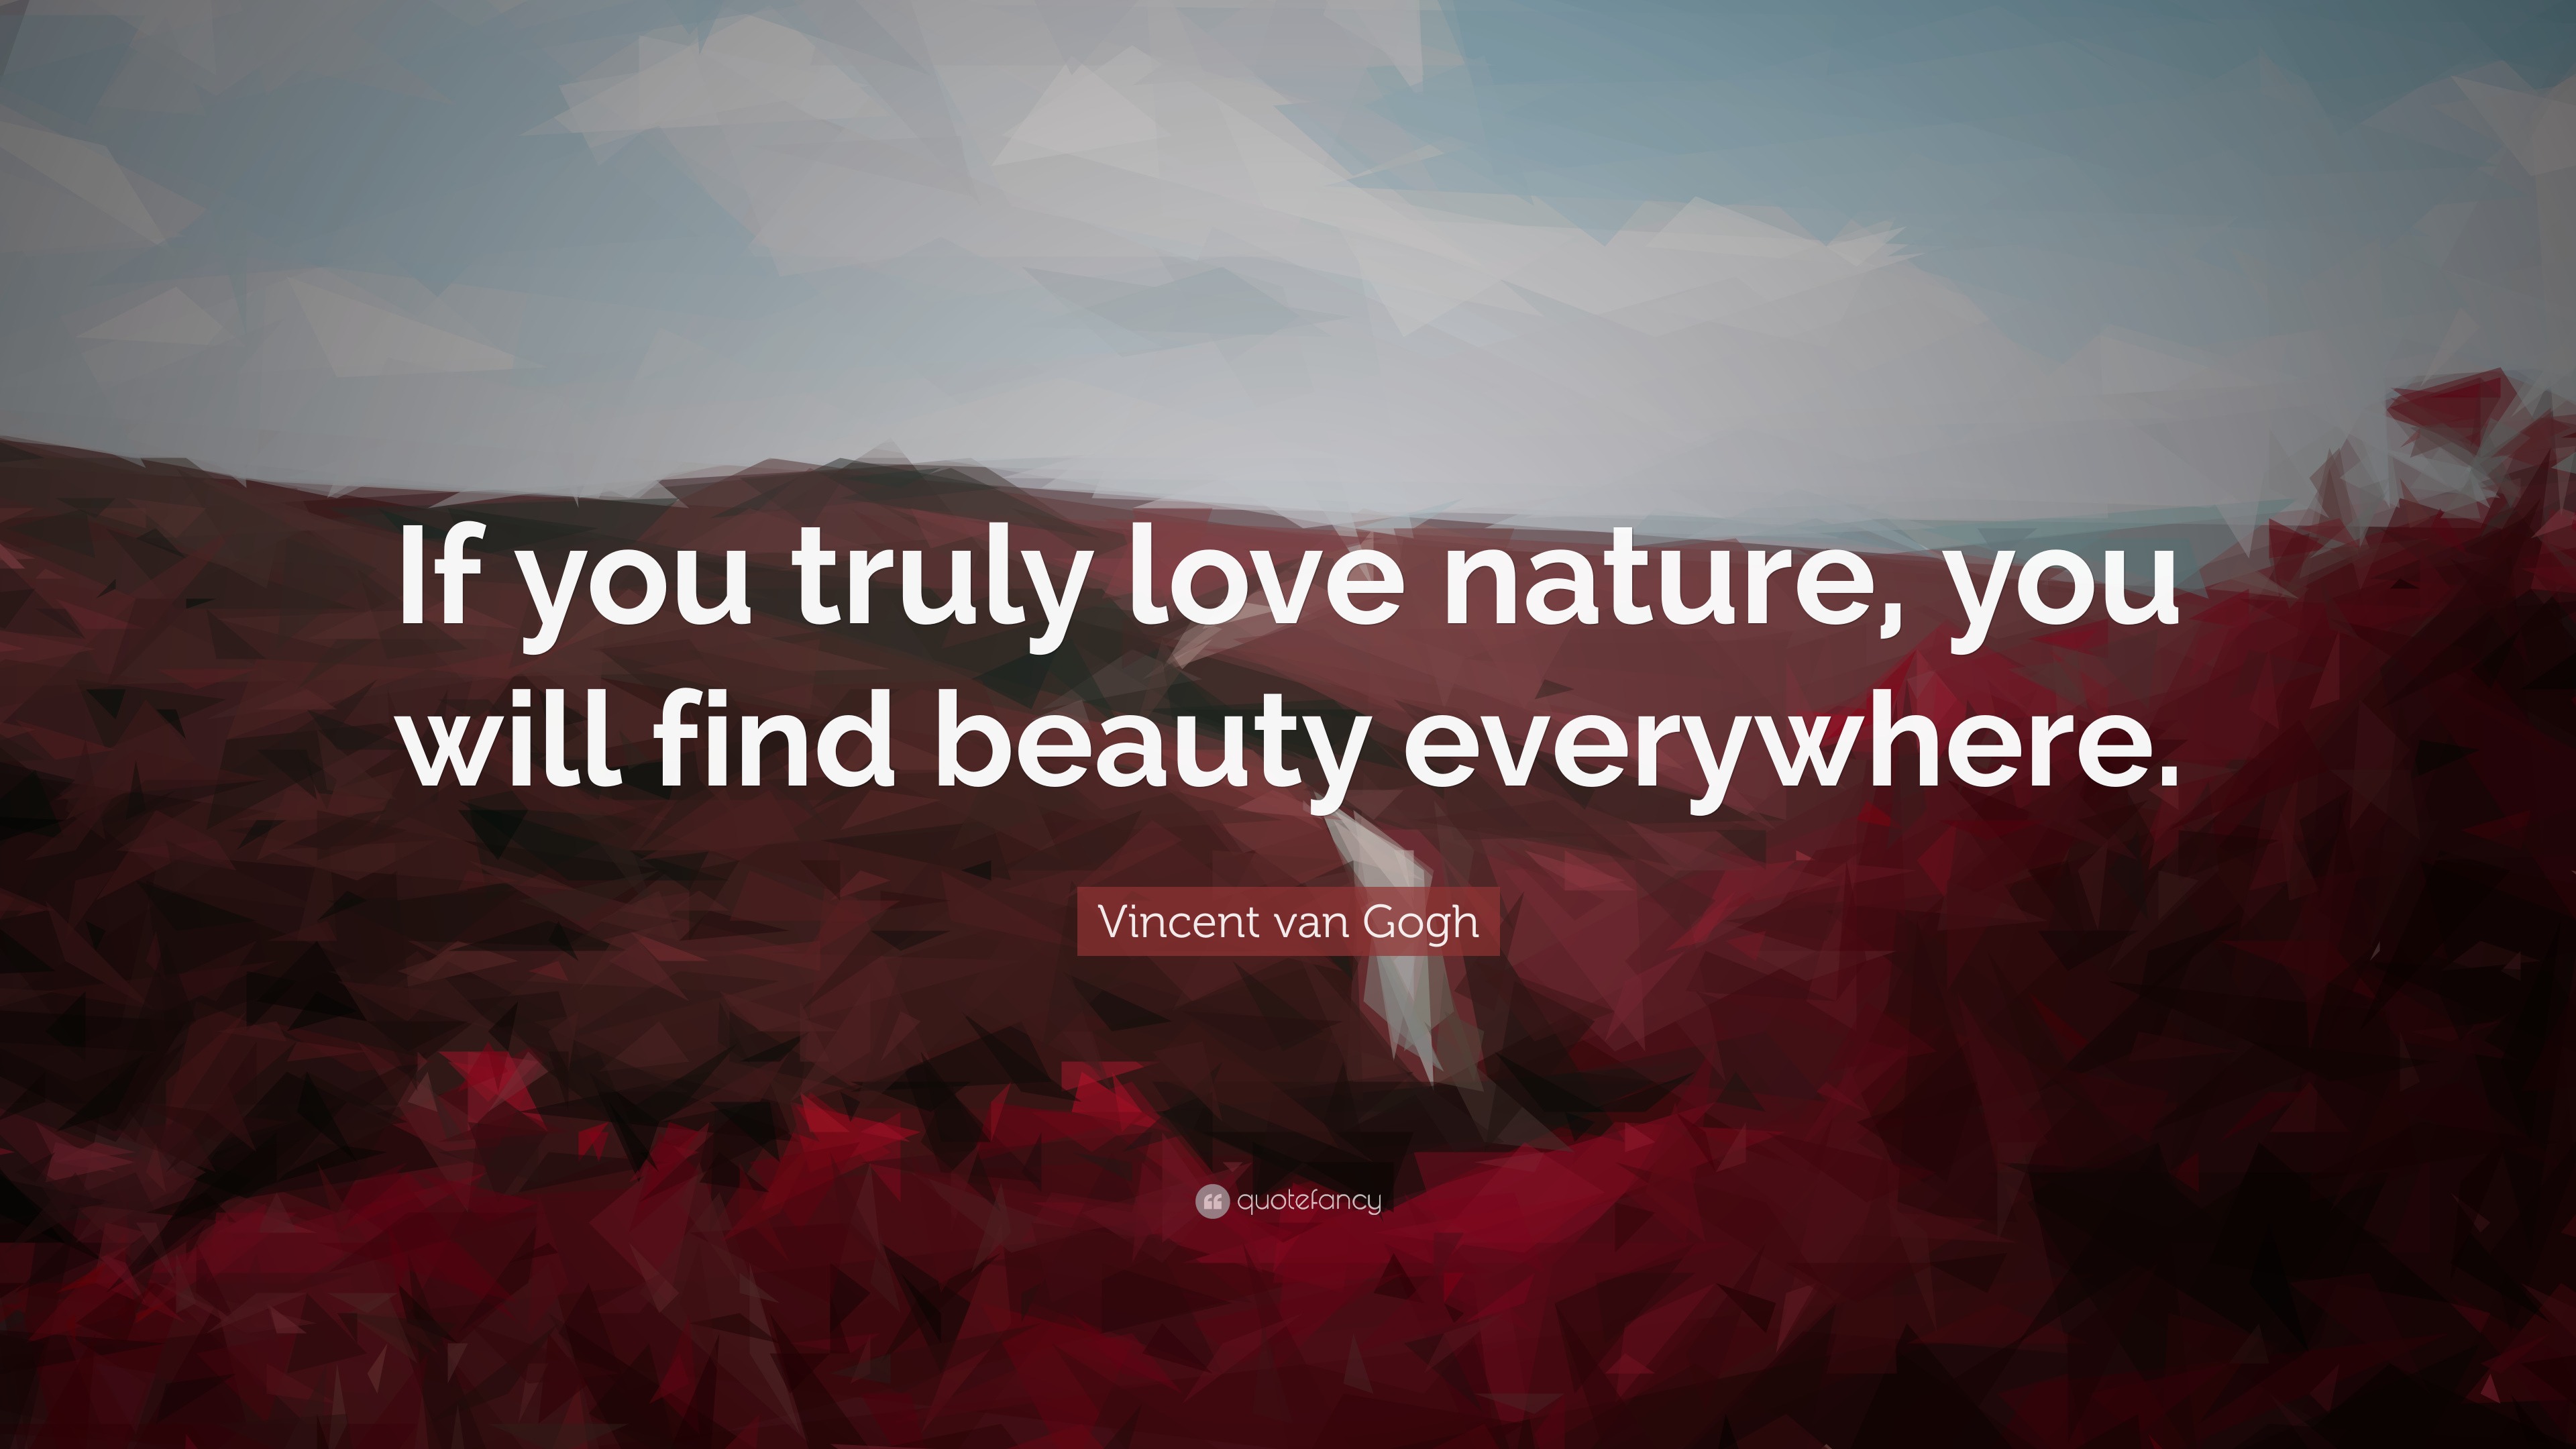 Vincent van Gogh Quote: “If you truly love nature, you will find beauty ...